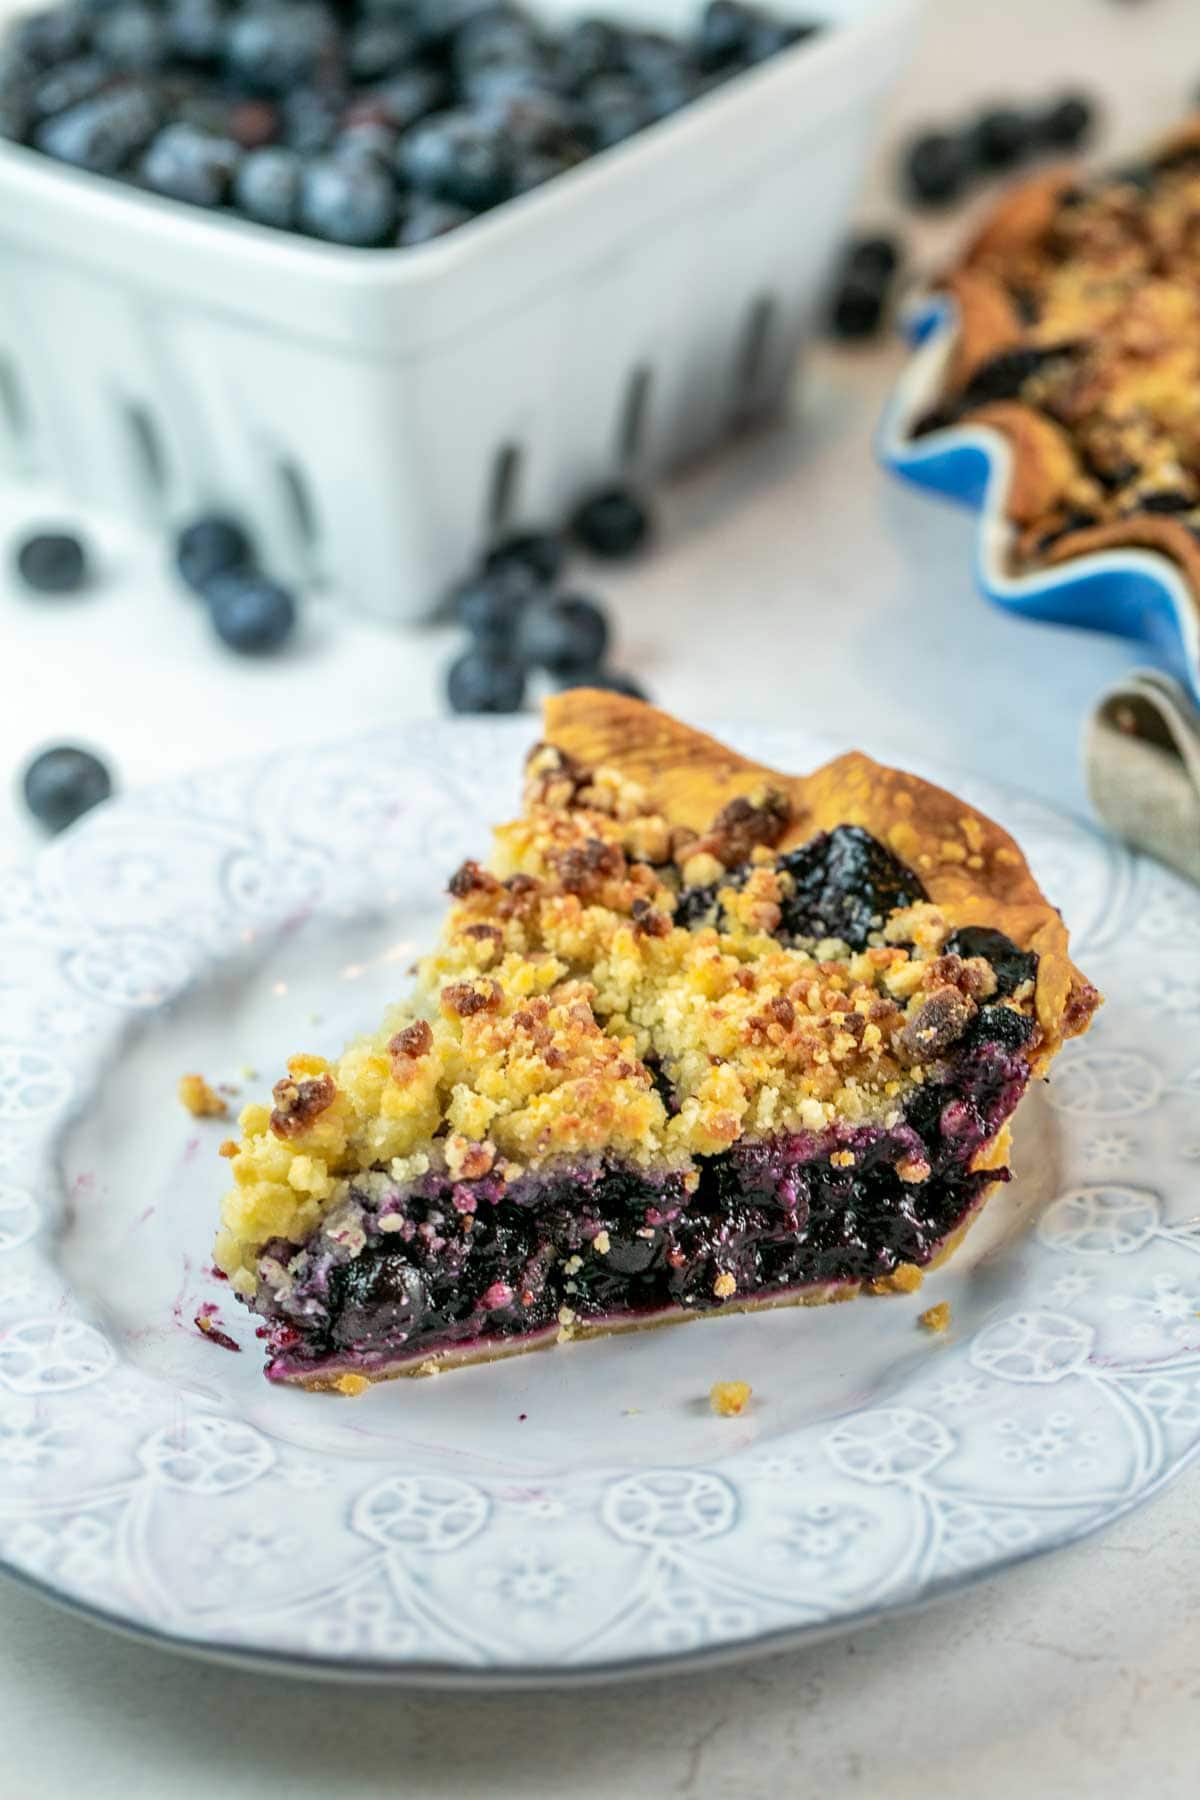 neatly cut slice of blueberry pie covered in a toasted almond crumb